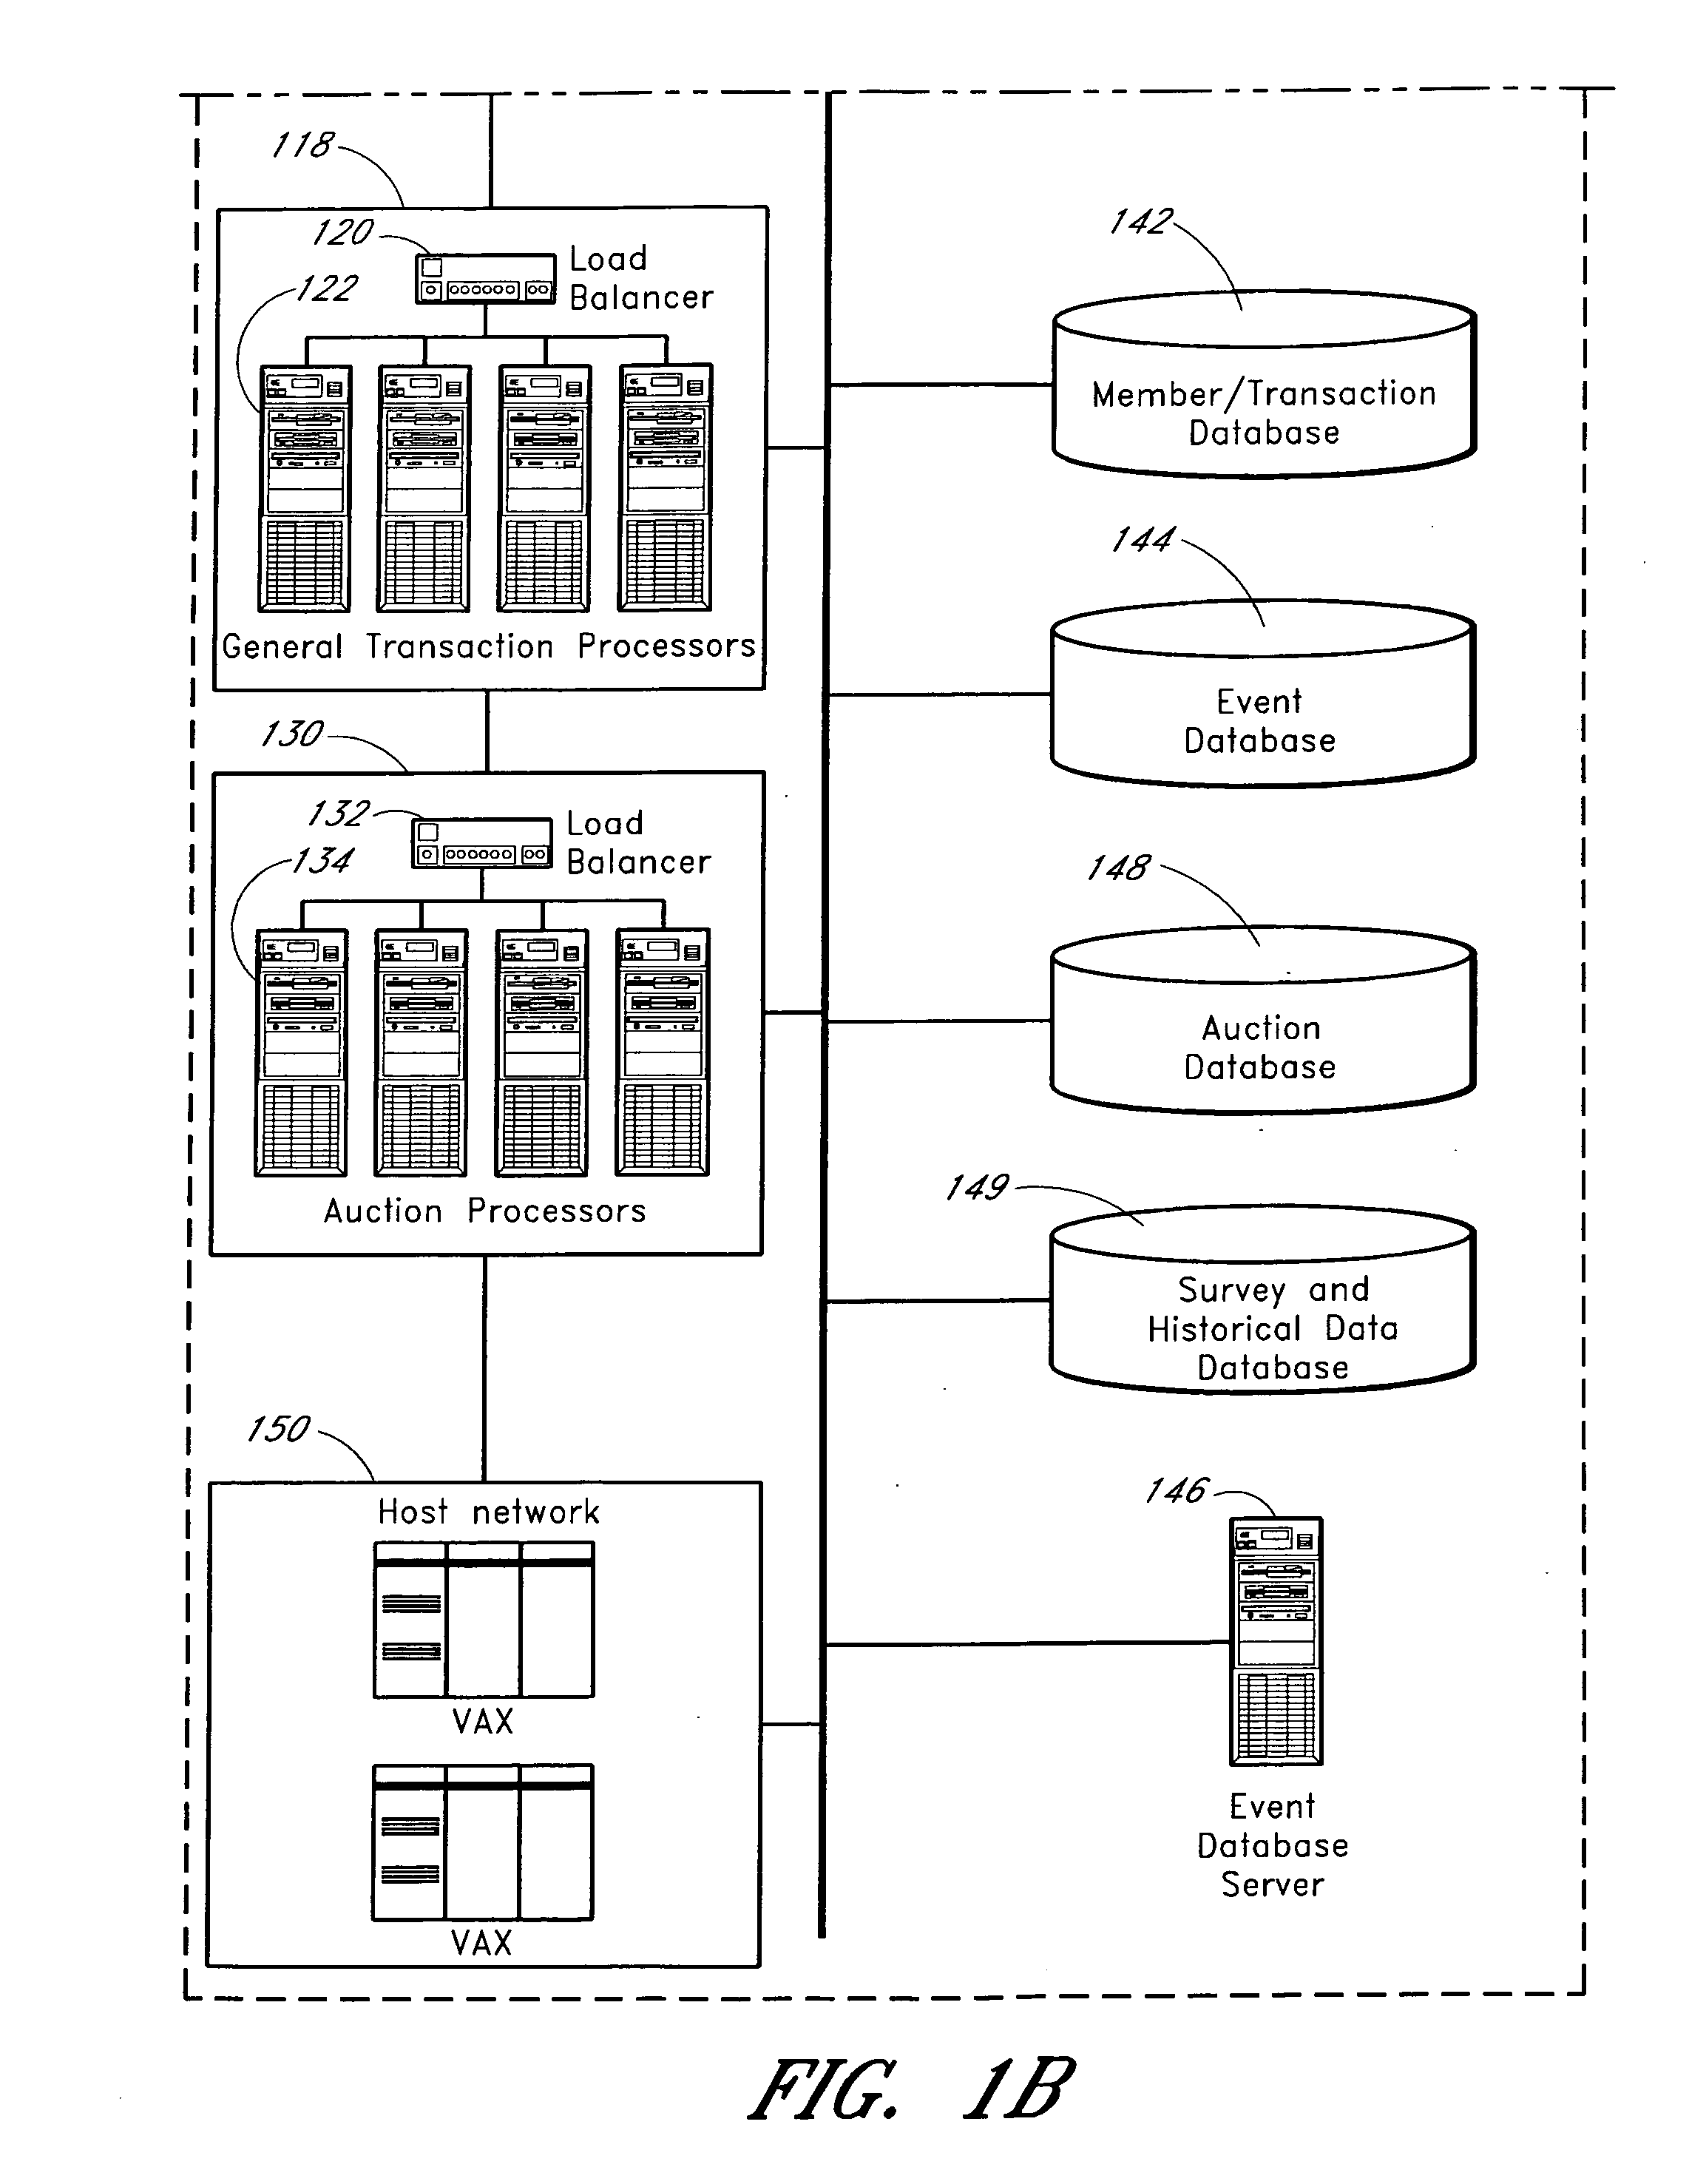 Computer-implemented systems and methods for resource allocation